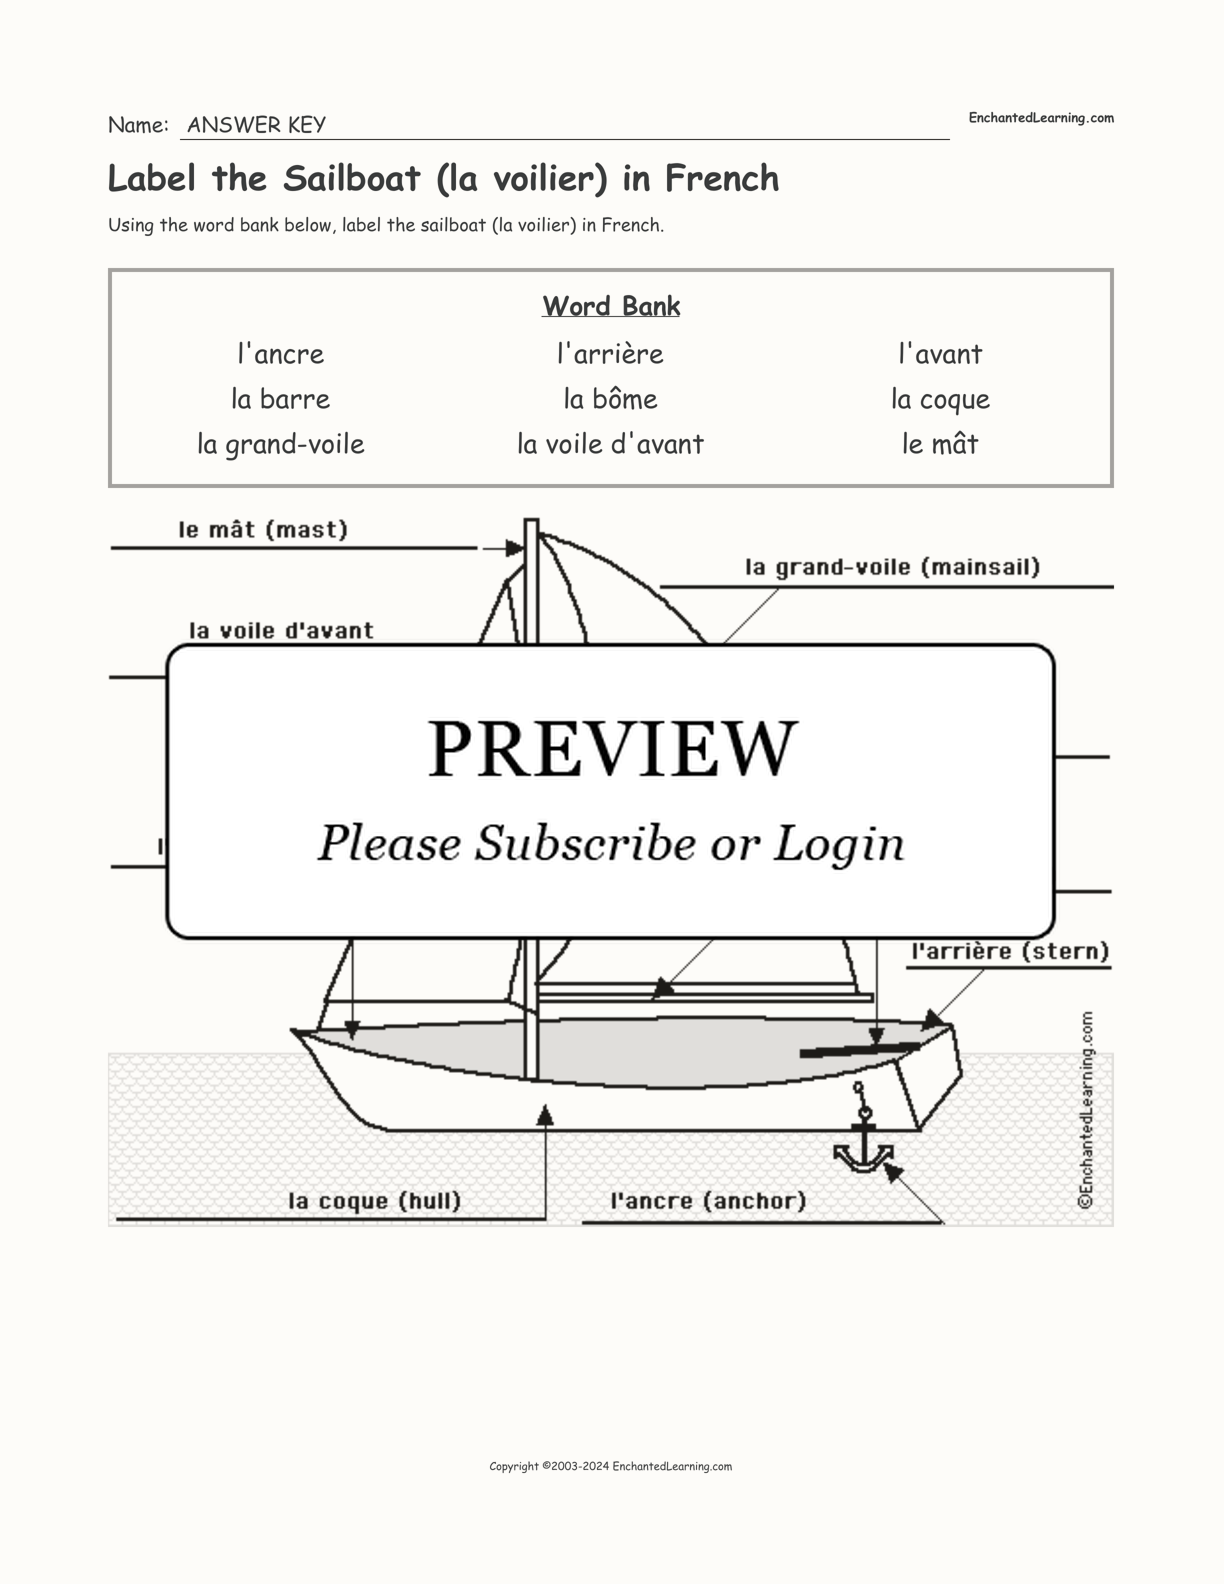 Label the Sailboat (la voilier) in French interactive worksheet page 2